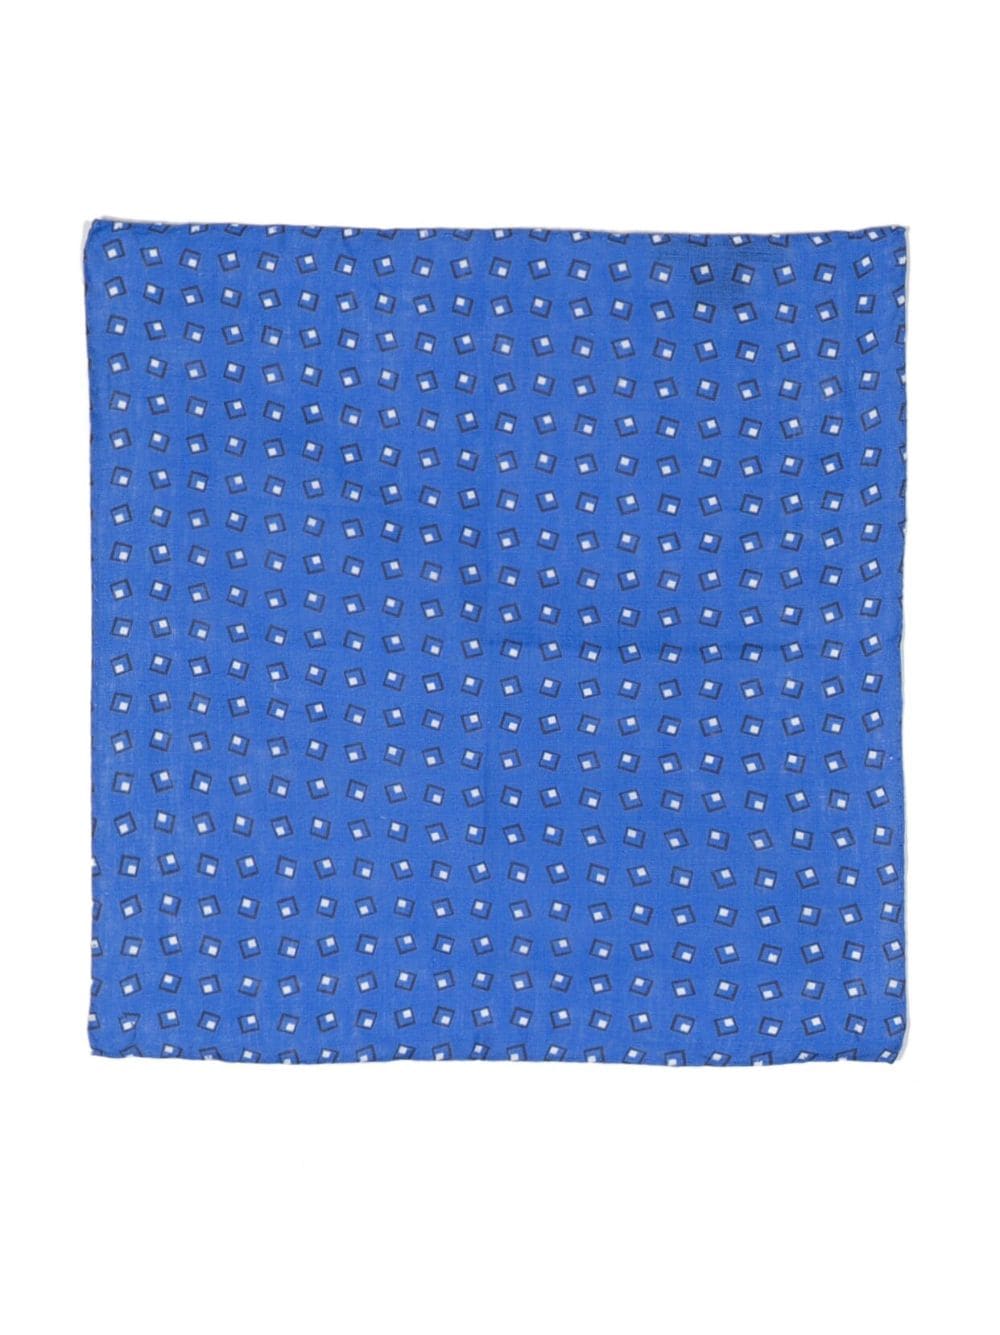 graphic-print lined pocket square